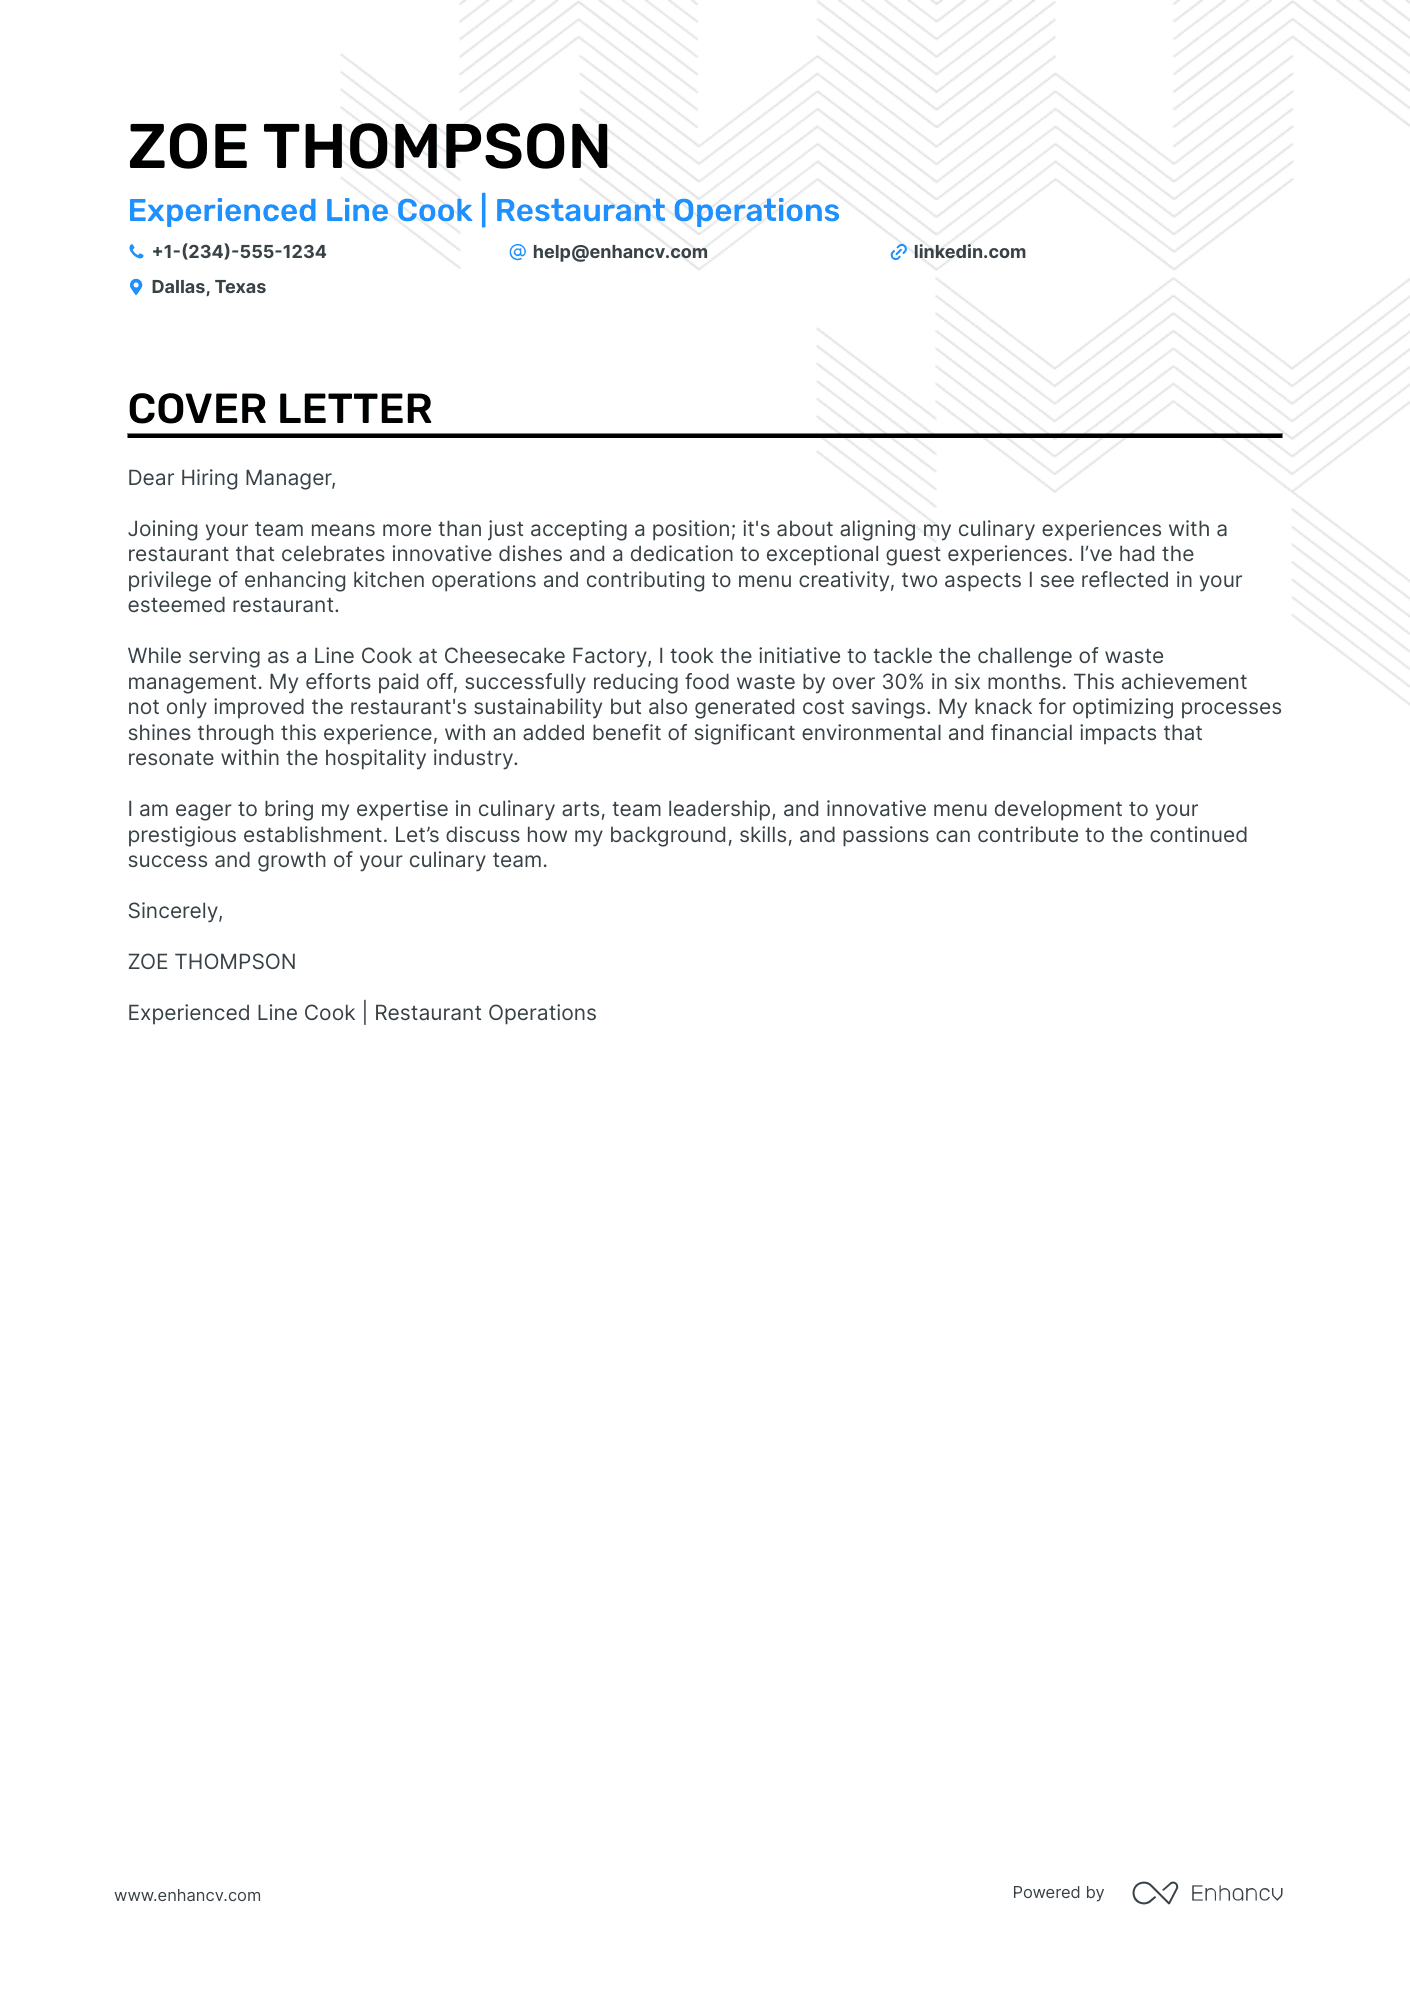 application letter about cooking